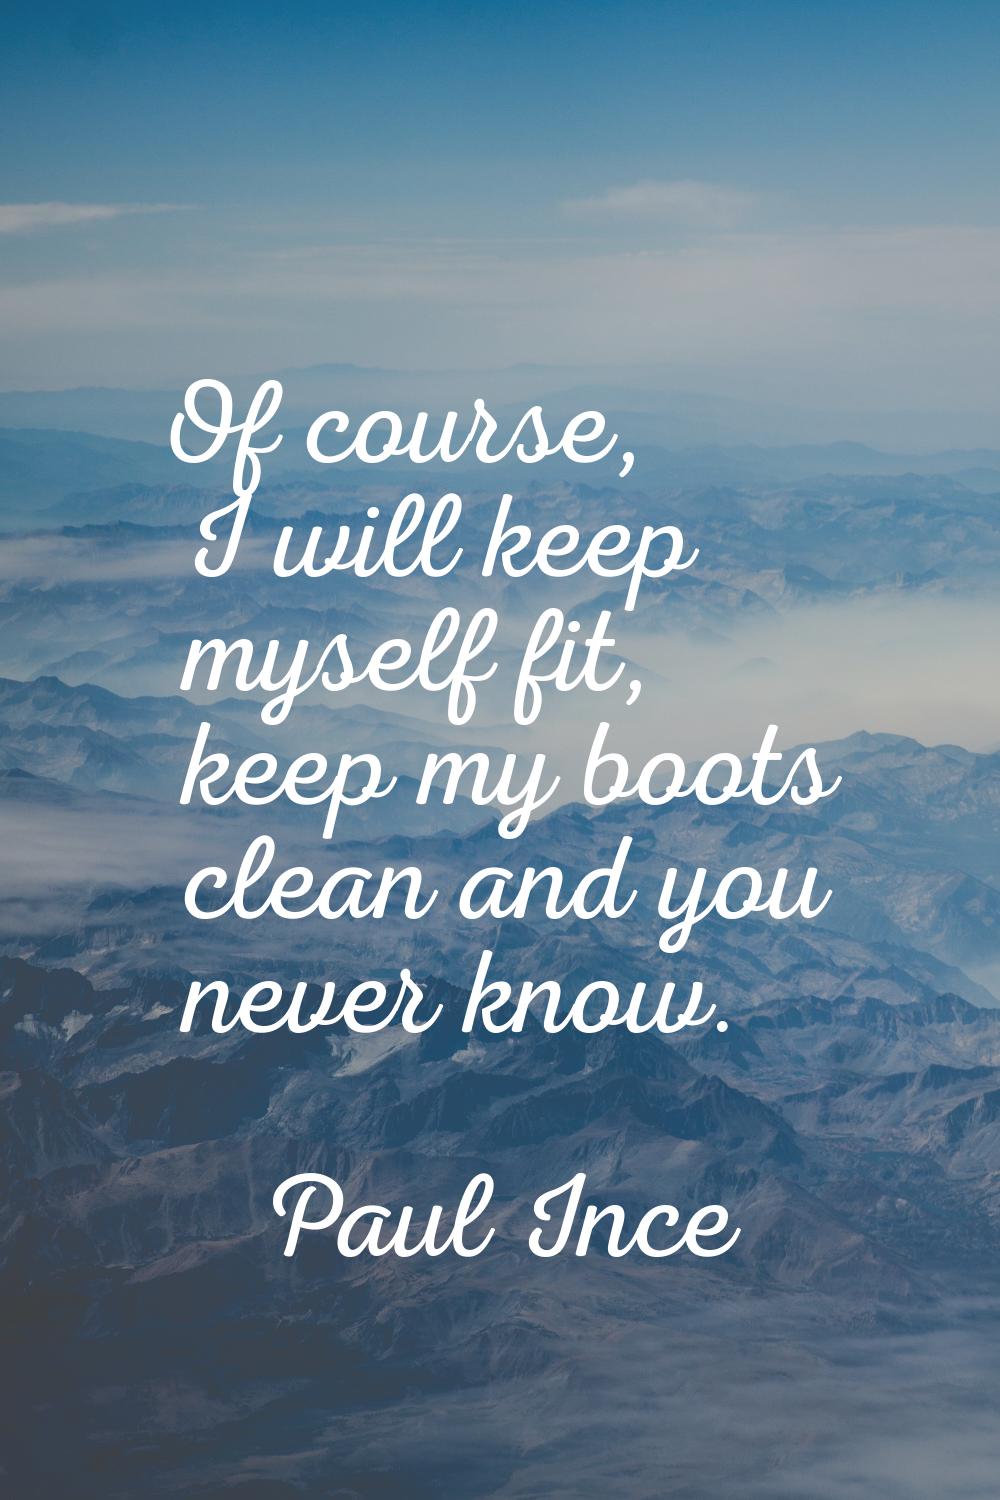 Of course, I will keep myself fit, keep my boots clean and you never know.